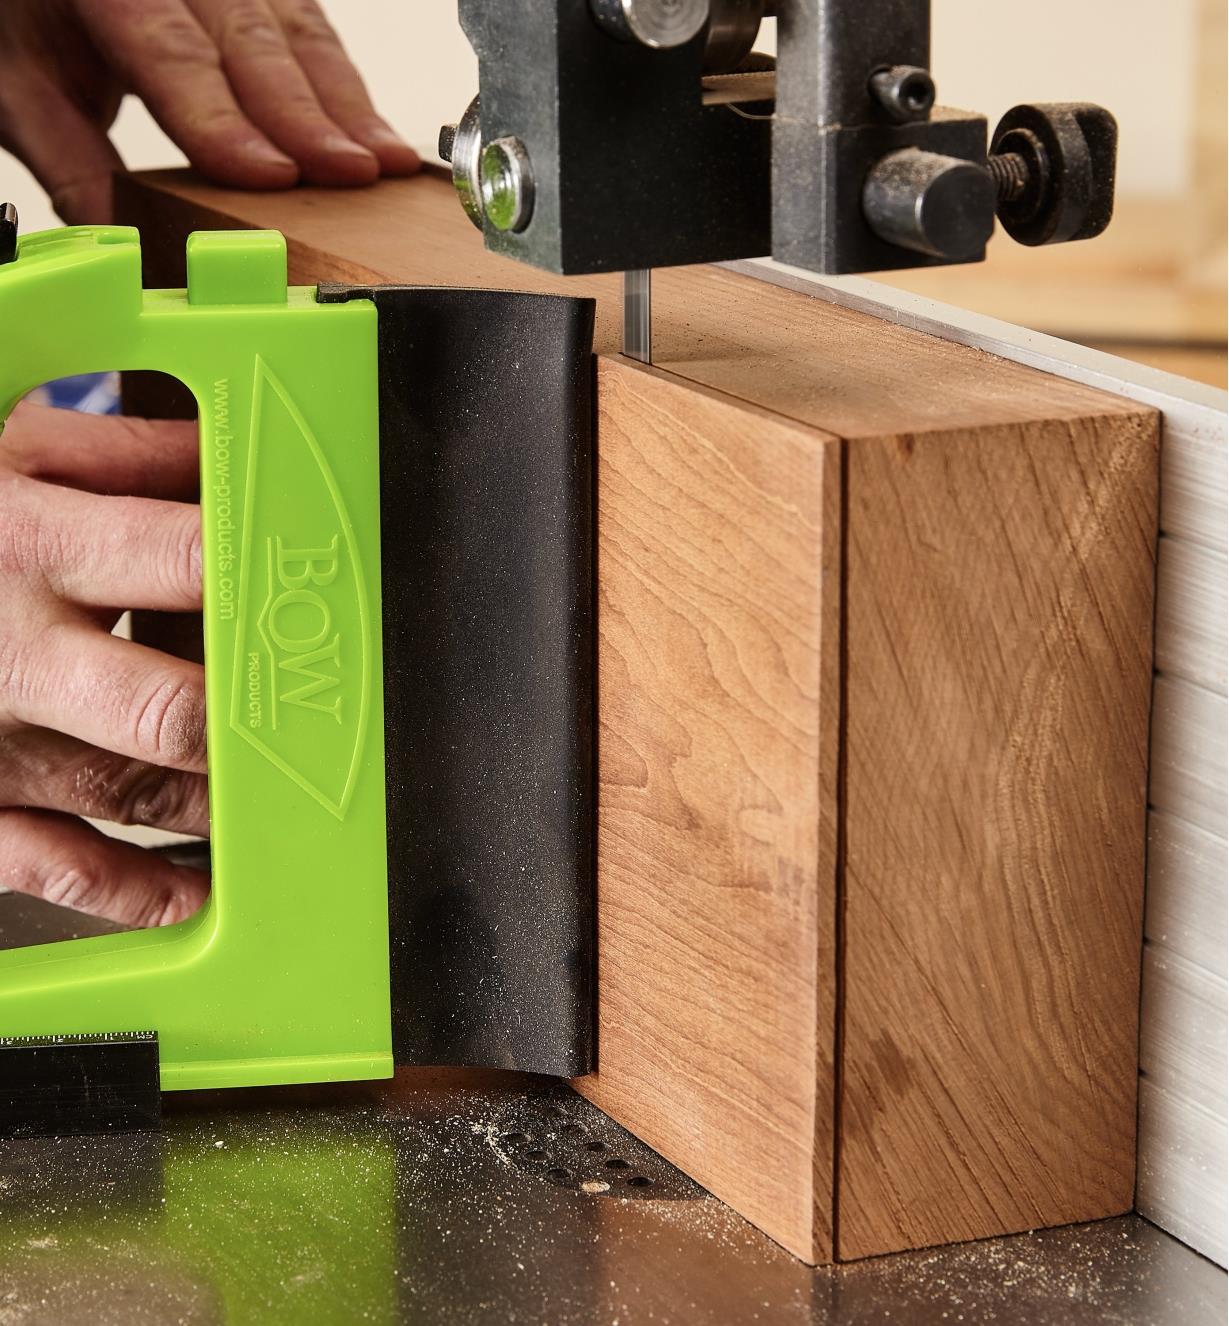 GuidePRO bandsaw guide used for resawing a tall, thick wood plank